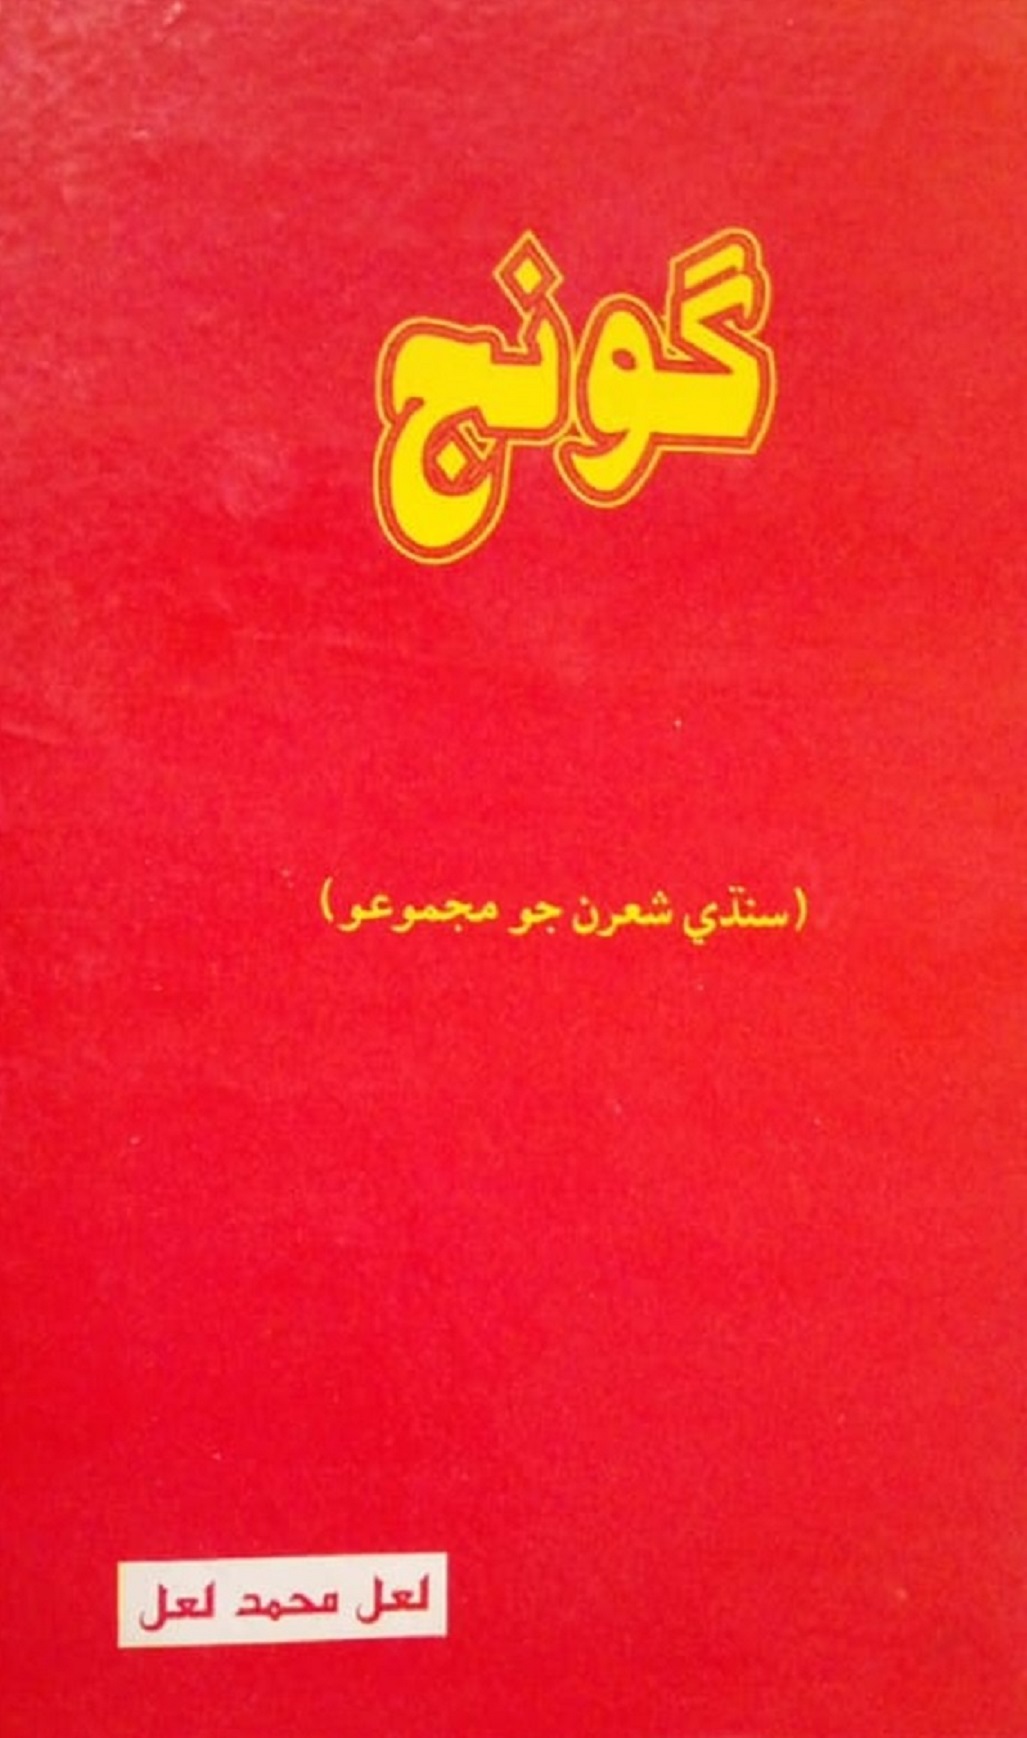 'GOONJ' (The Echo) The poetry collection of Lal Muhammad 'Lal' in Sindhi - Sindh Courier